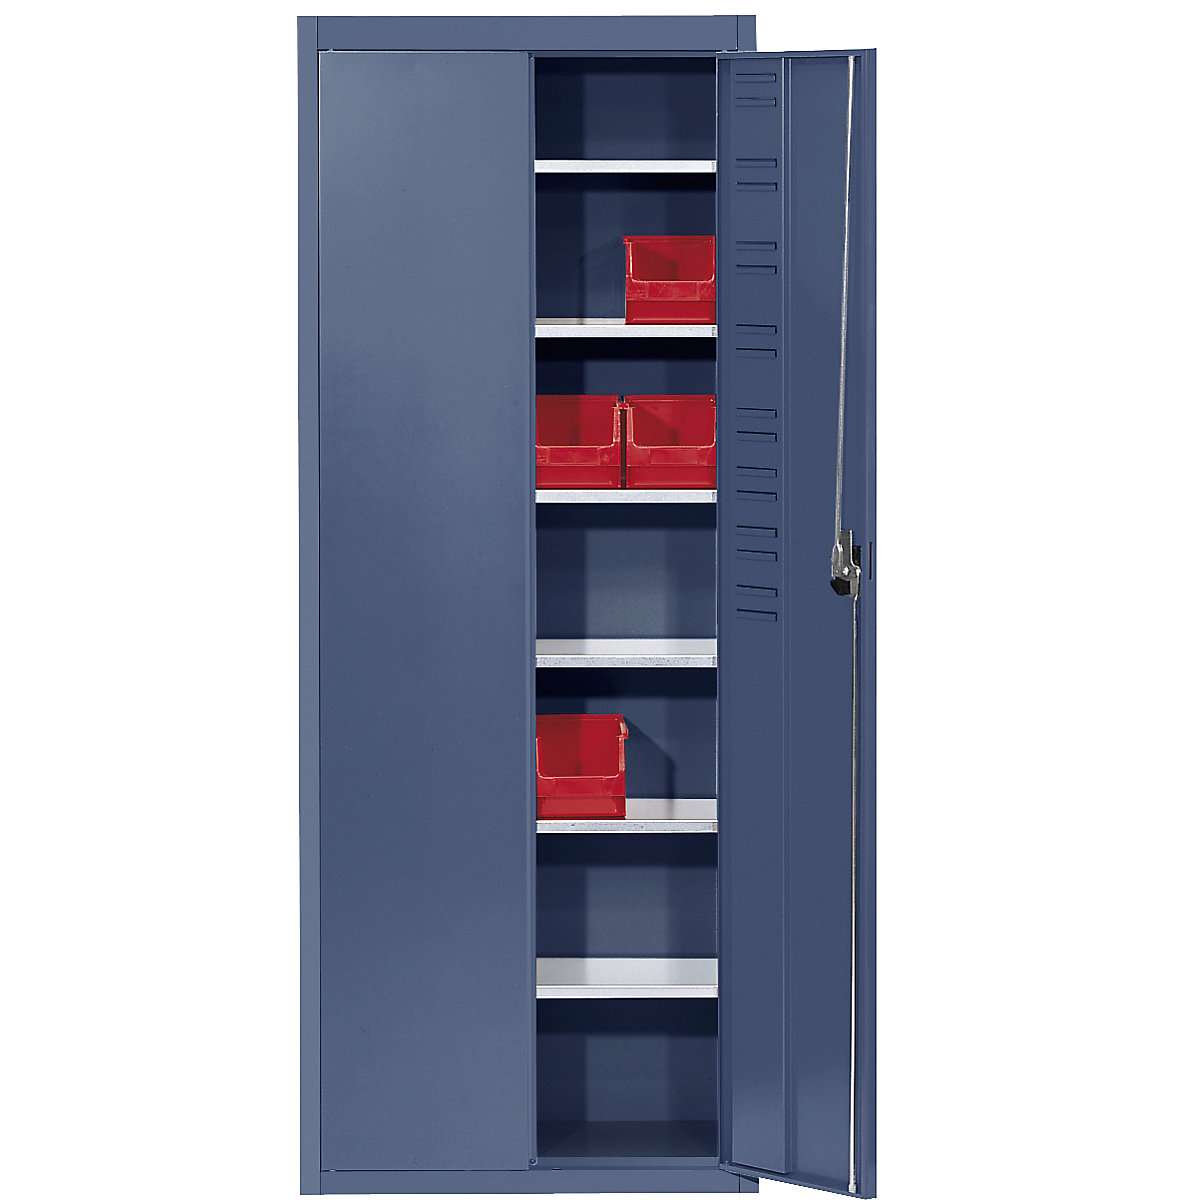 Storage cupboard, without open fronted storage bins – mauser, HxWxD 1740 x 680 x 280 mm, single colour, brilliant blue-9